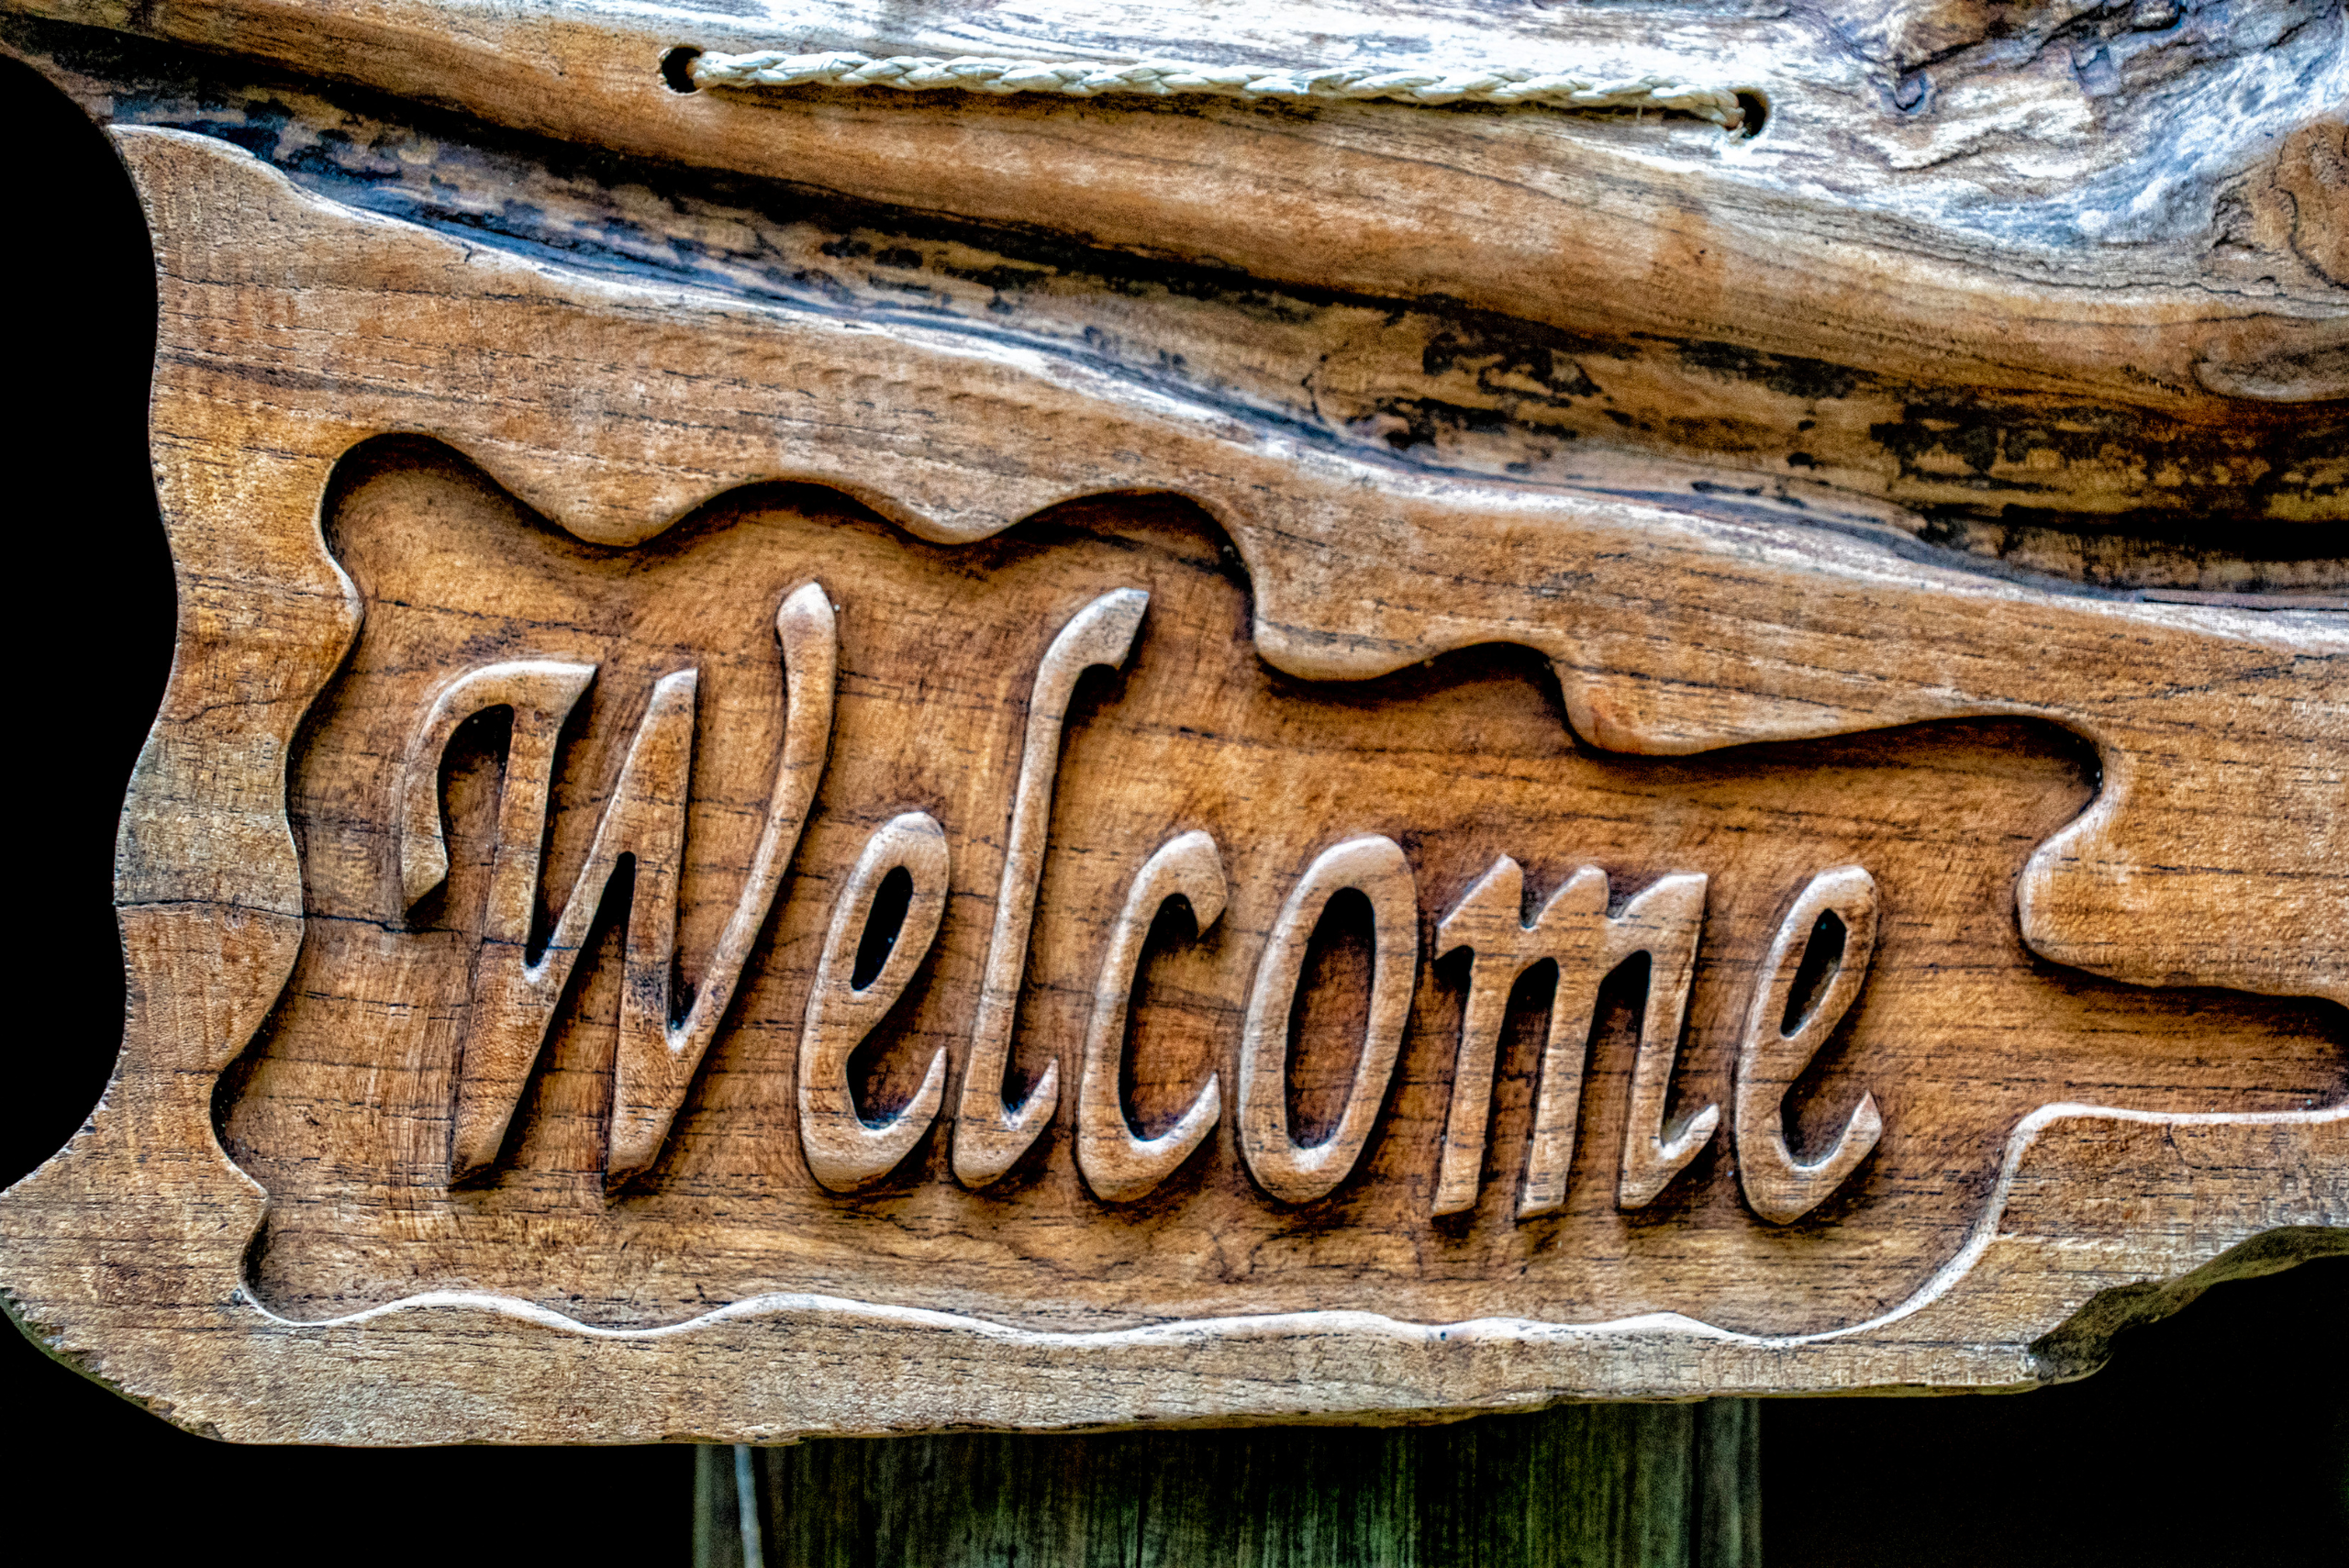 A "Welcome" sign carved of wood.